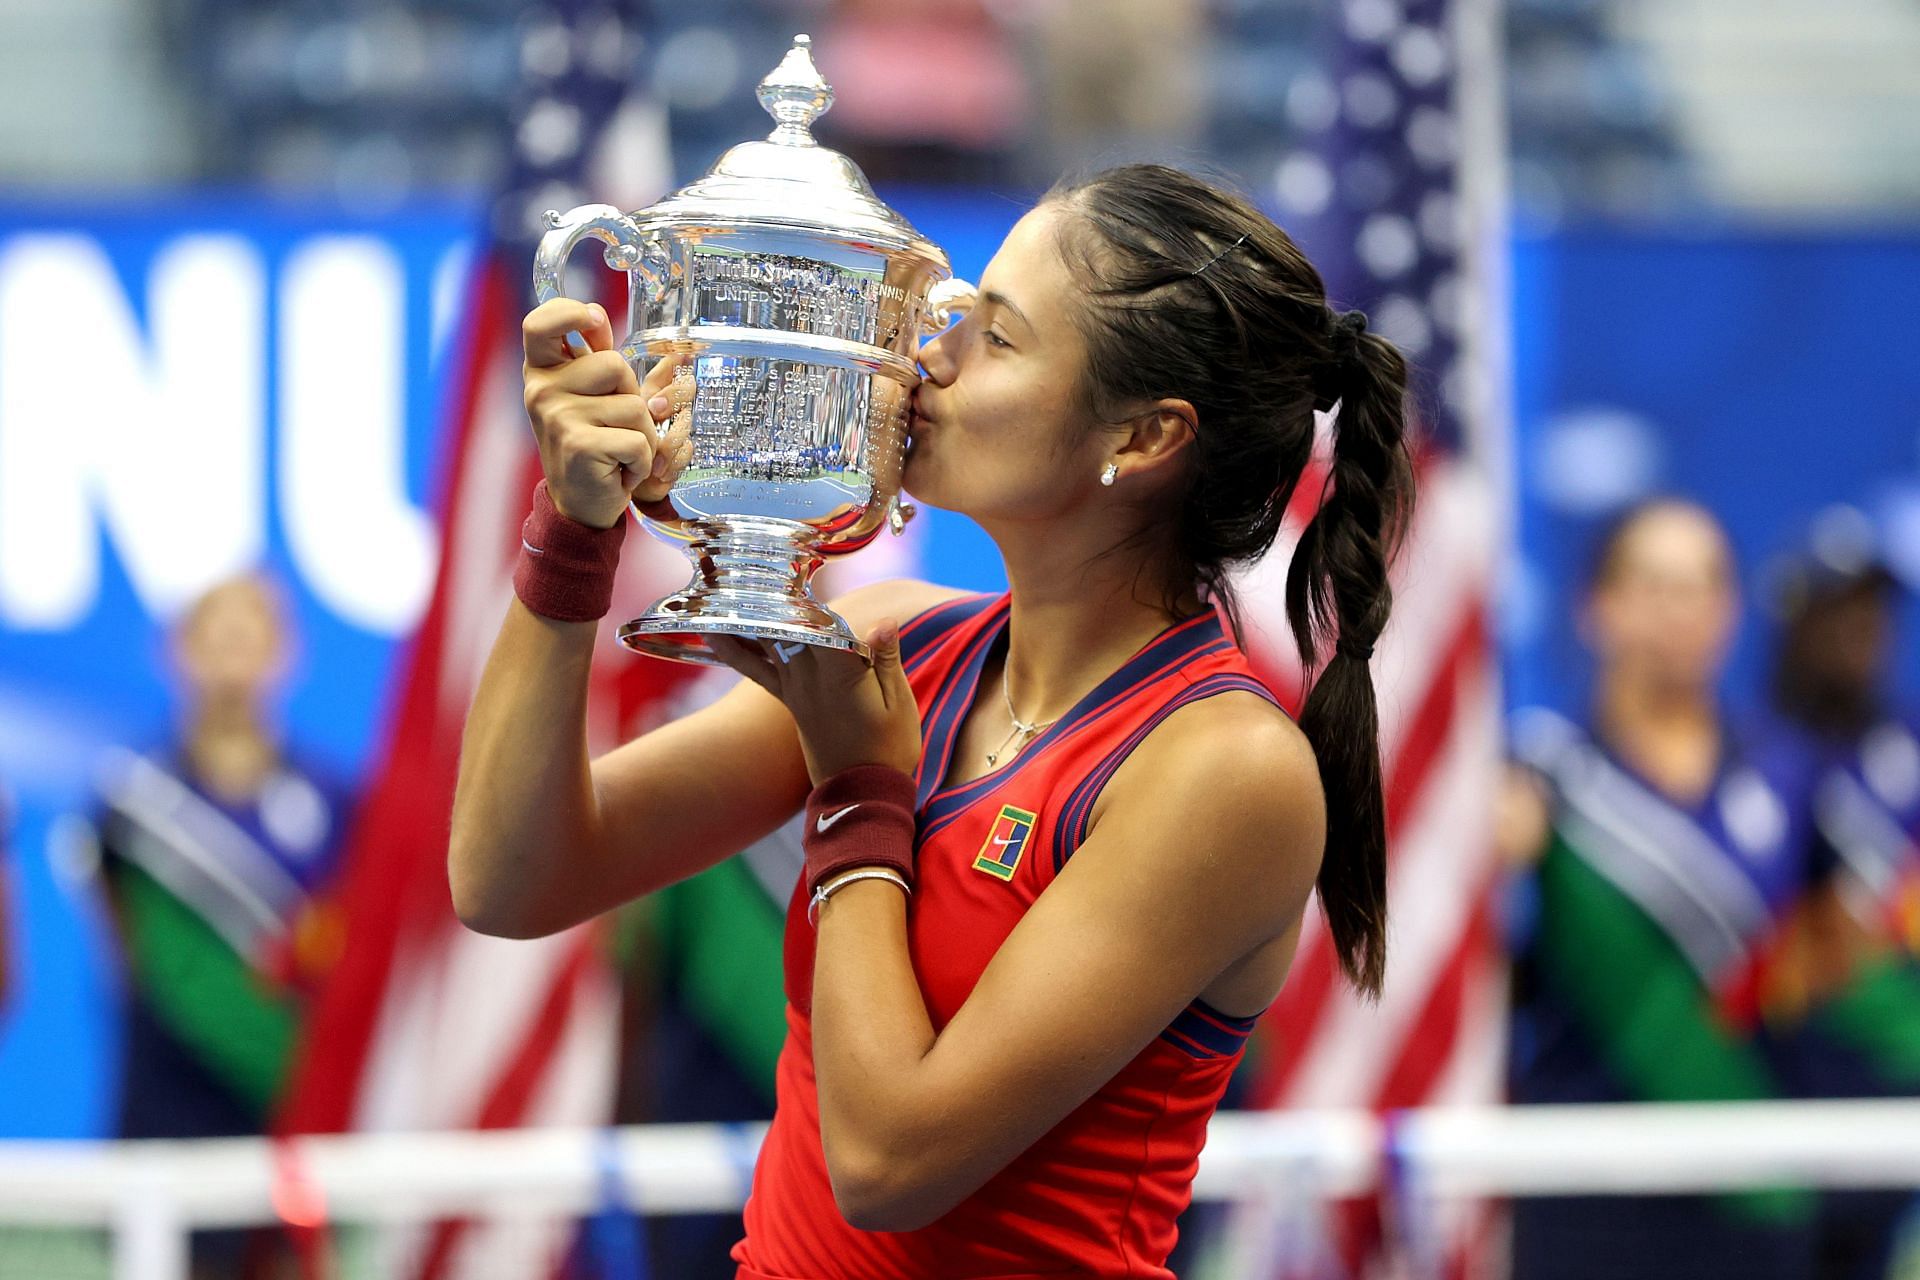 Raducanu won her first Grand Slam at the US Open